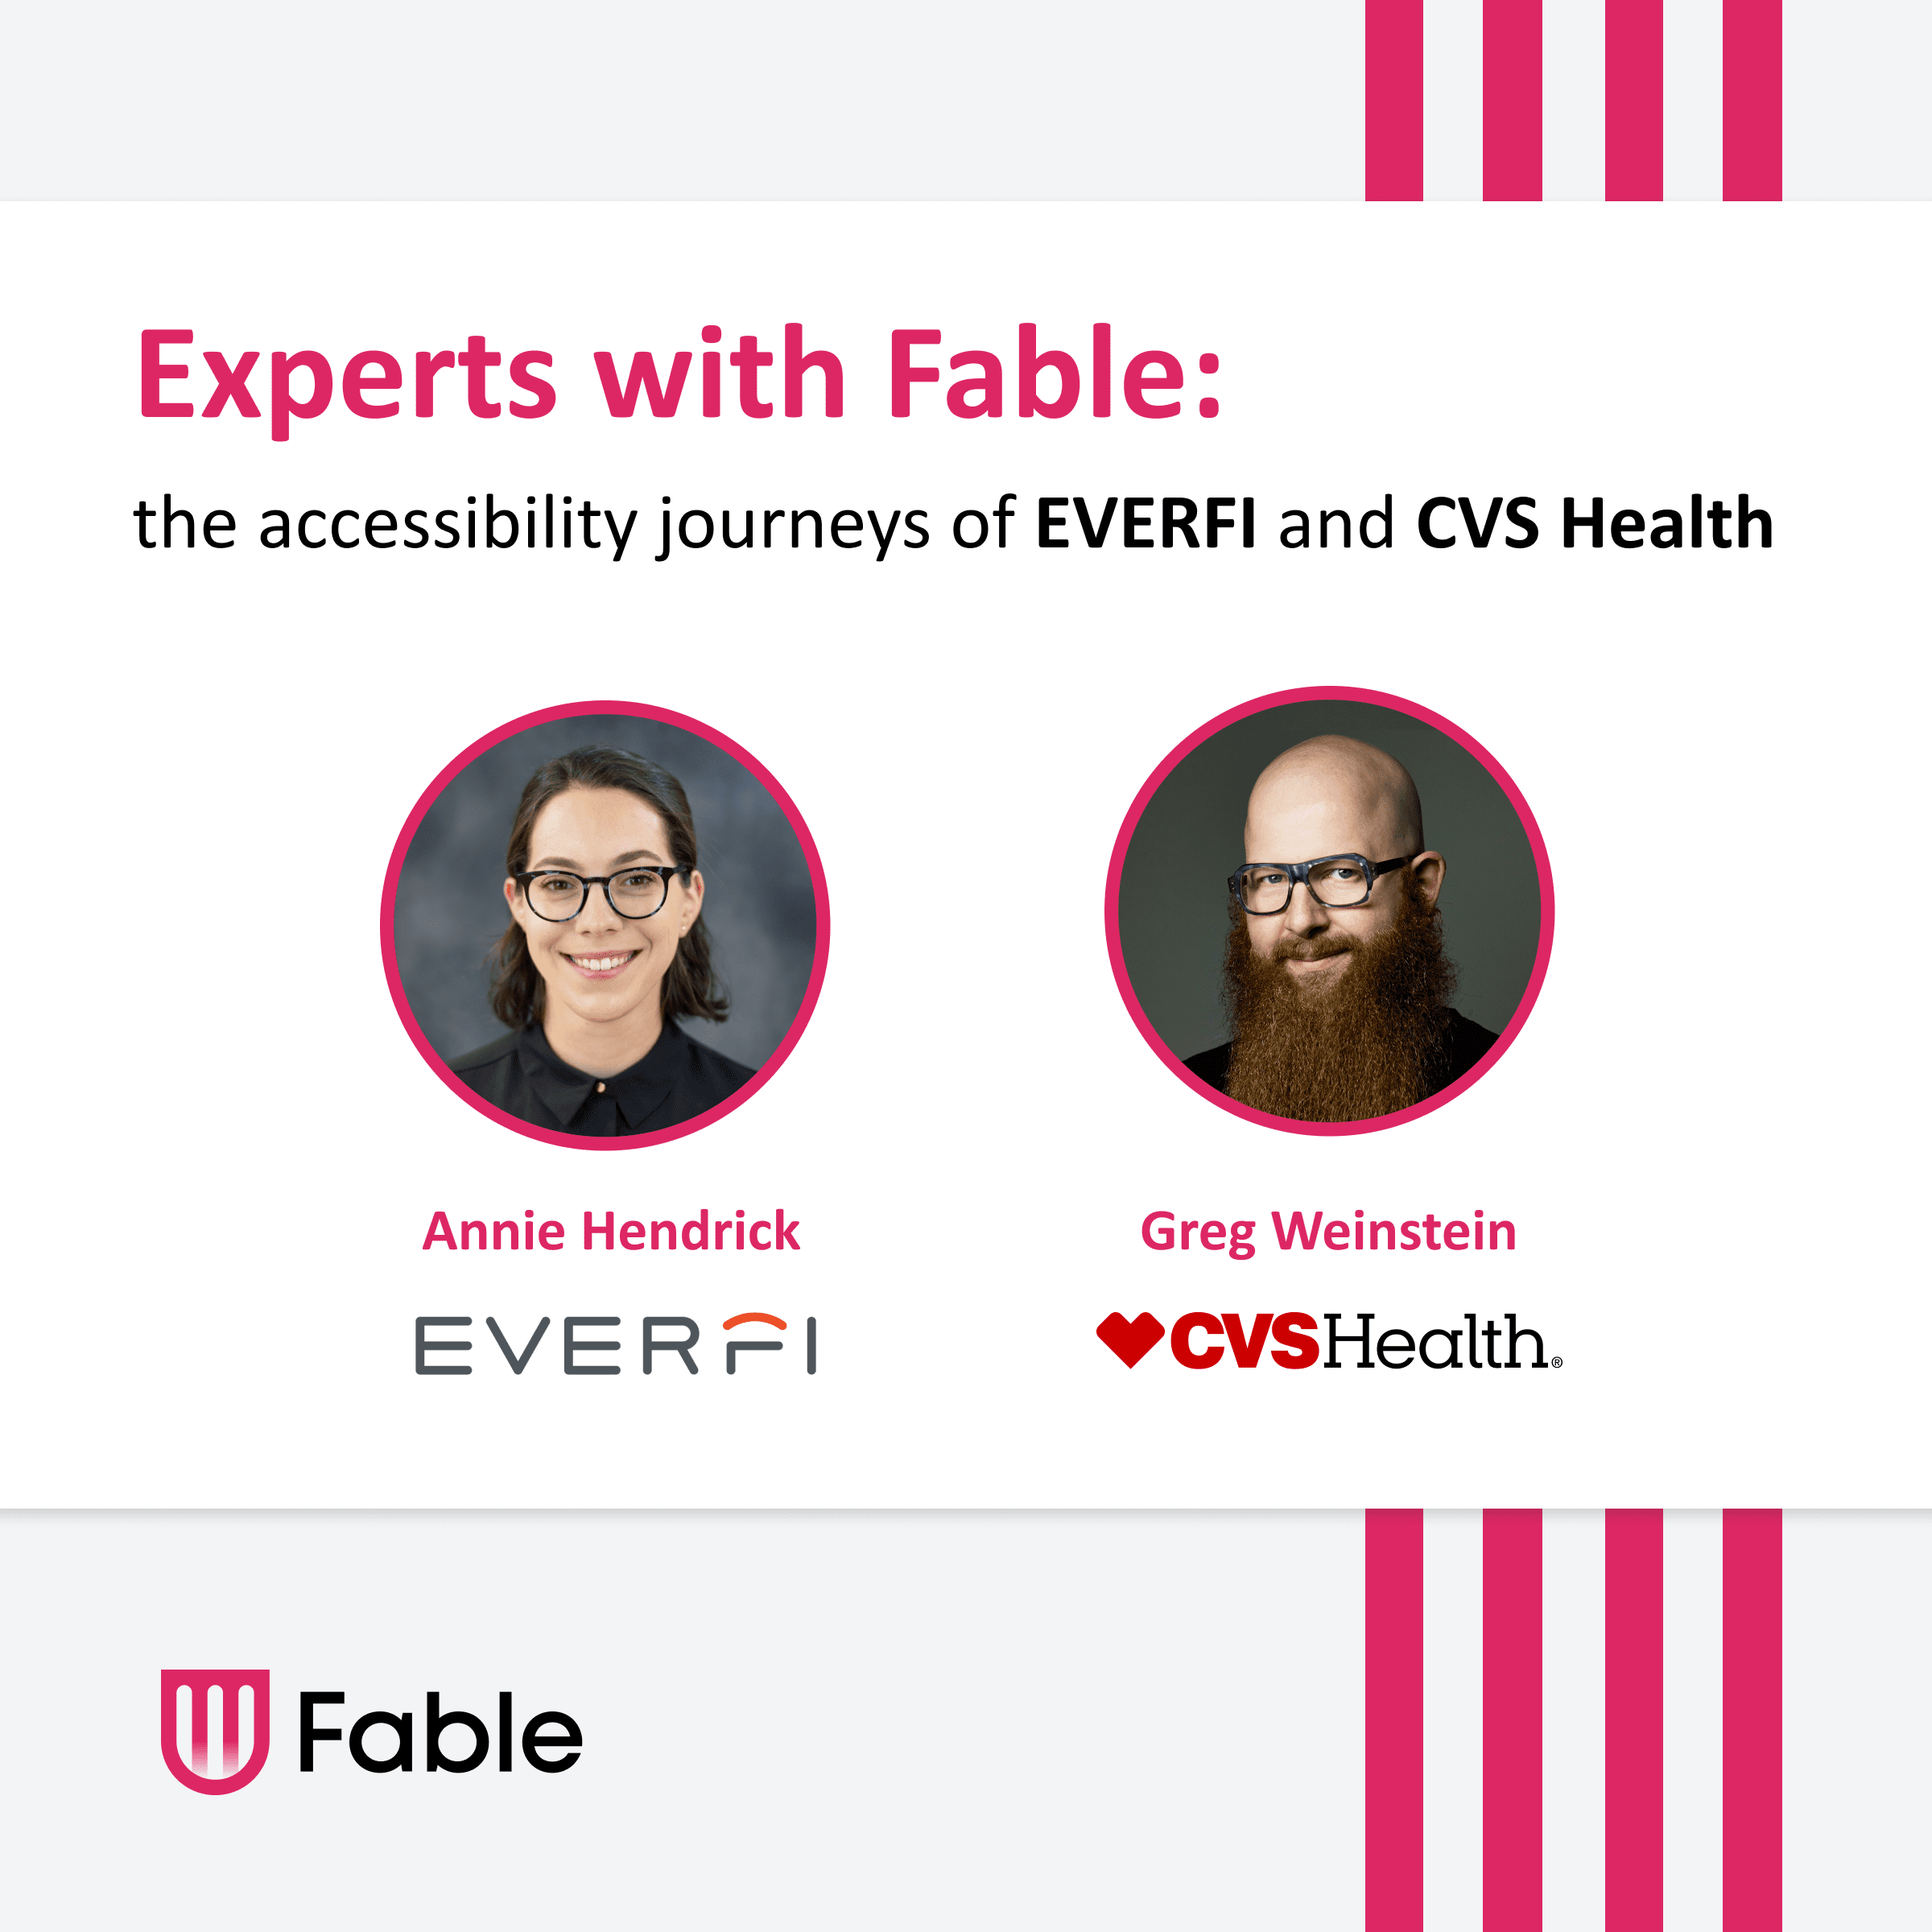 Experts with Fable: the accessibility journeys of EVERFI and CVS Health. Two headshots of speakers Annie and Greg, both white people with glasses. Annie has chin-length dark brown hair, and greg is bald with a long, red-brown beard. Fable logo with pink shield icon.